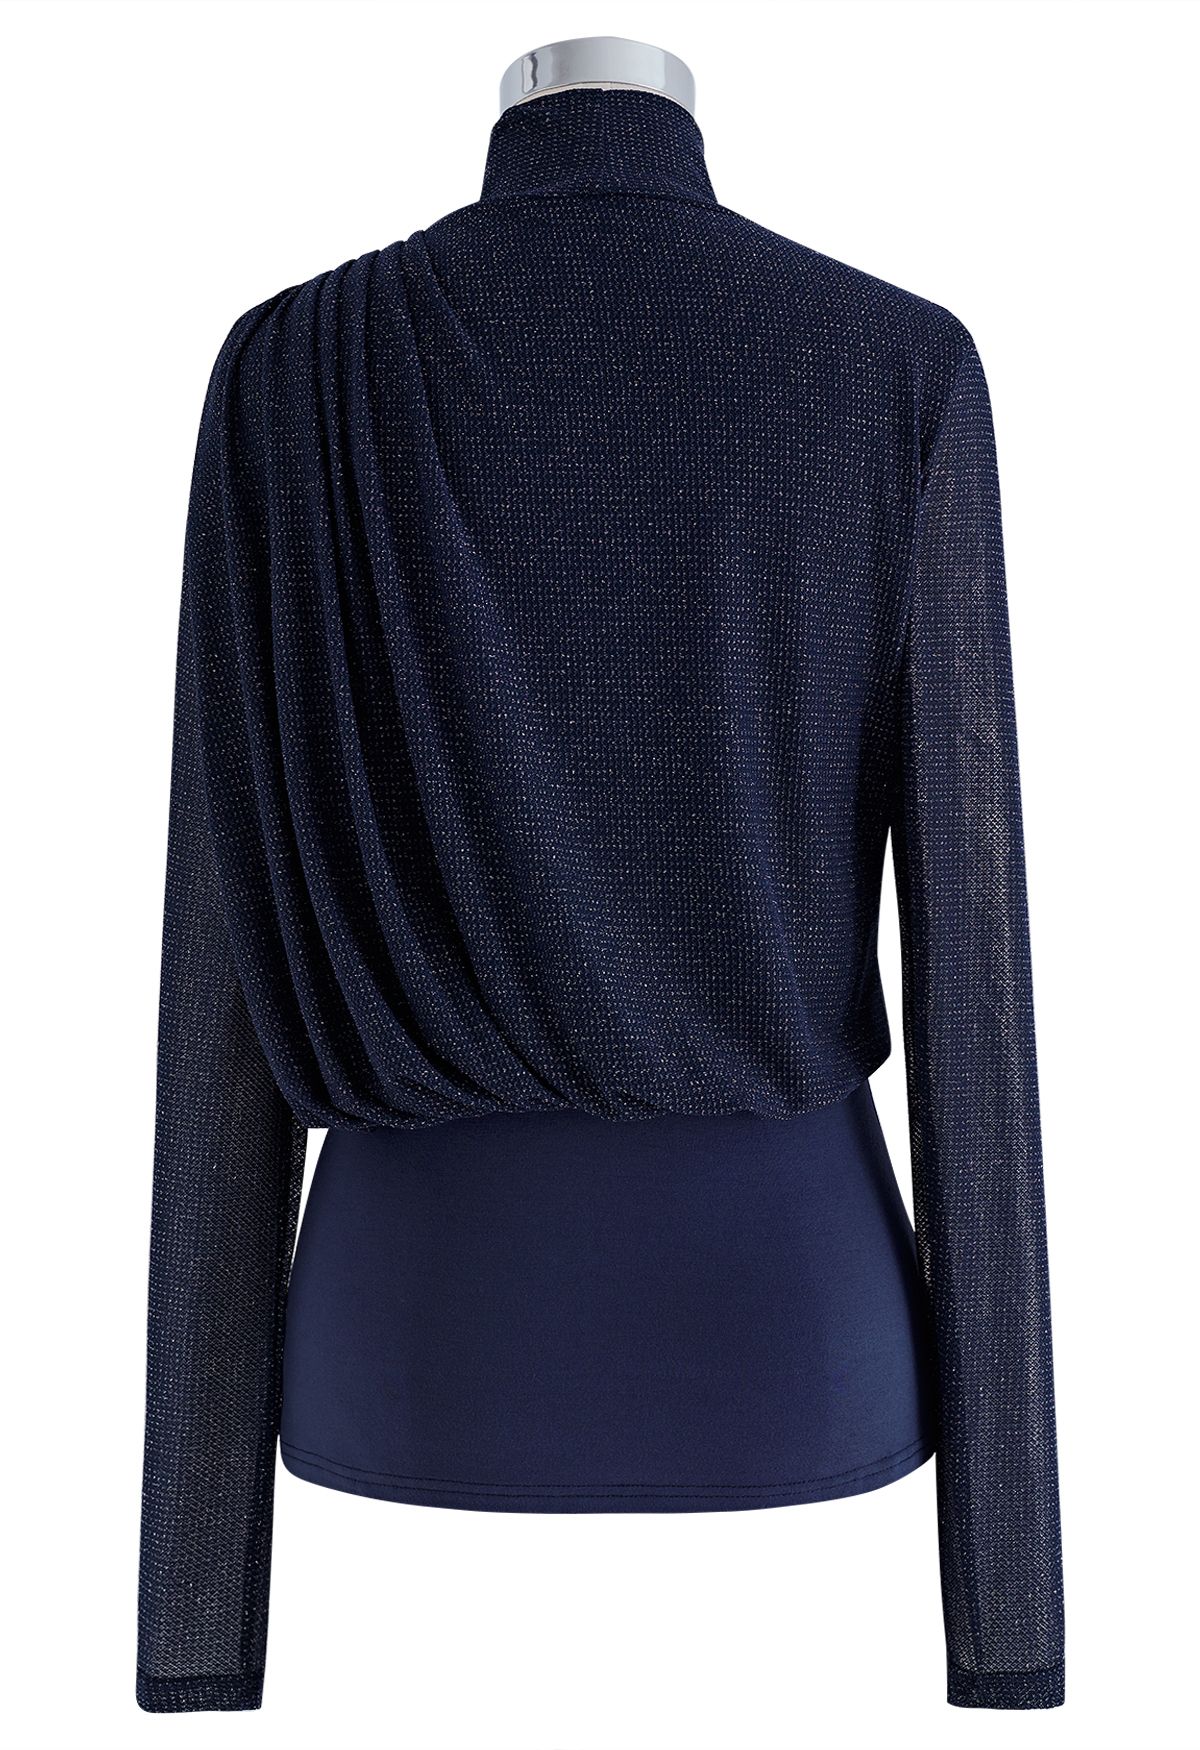 Gleam High Neck Spliced Ruched Top in Navy